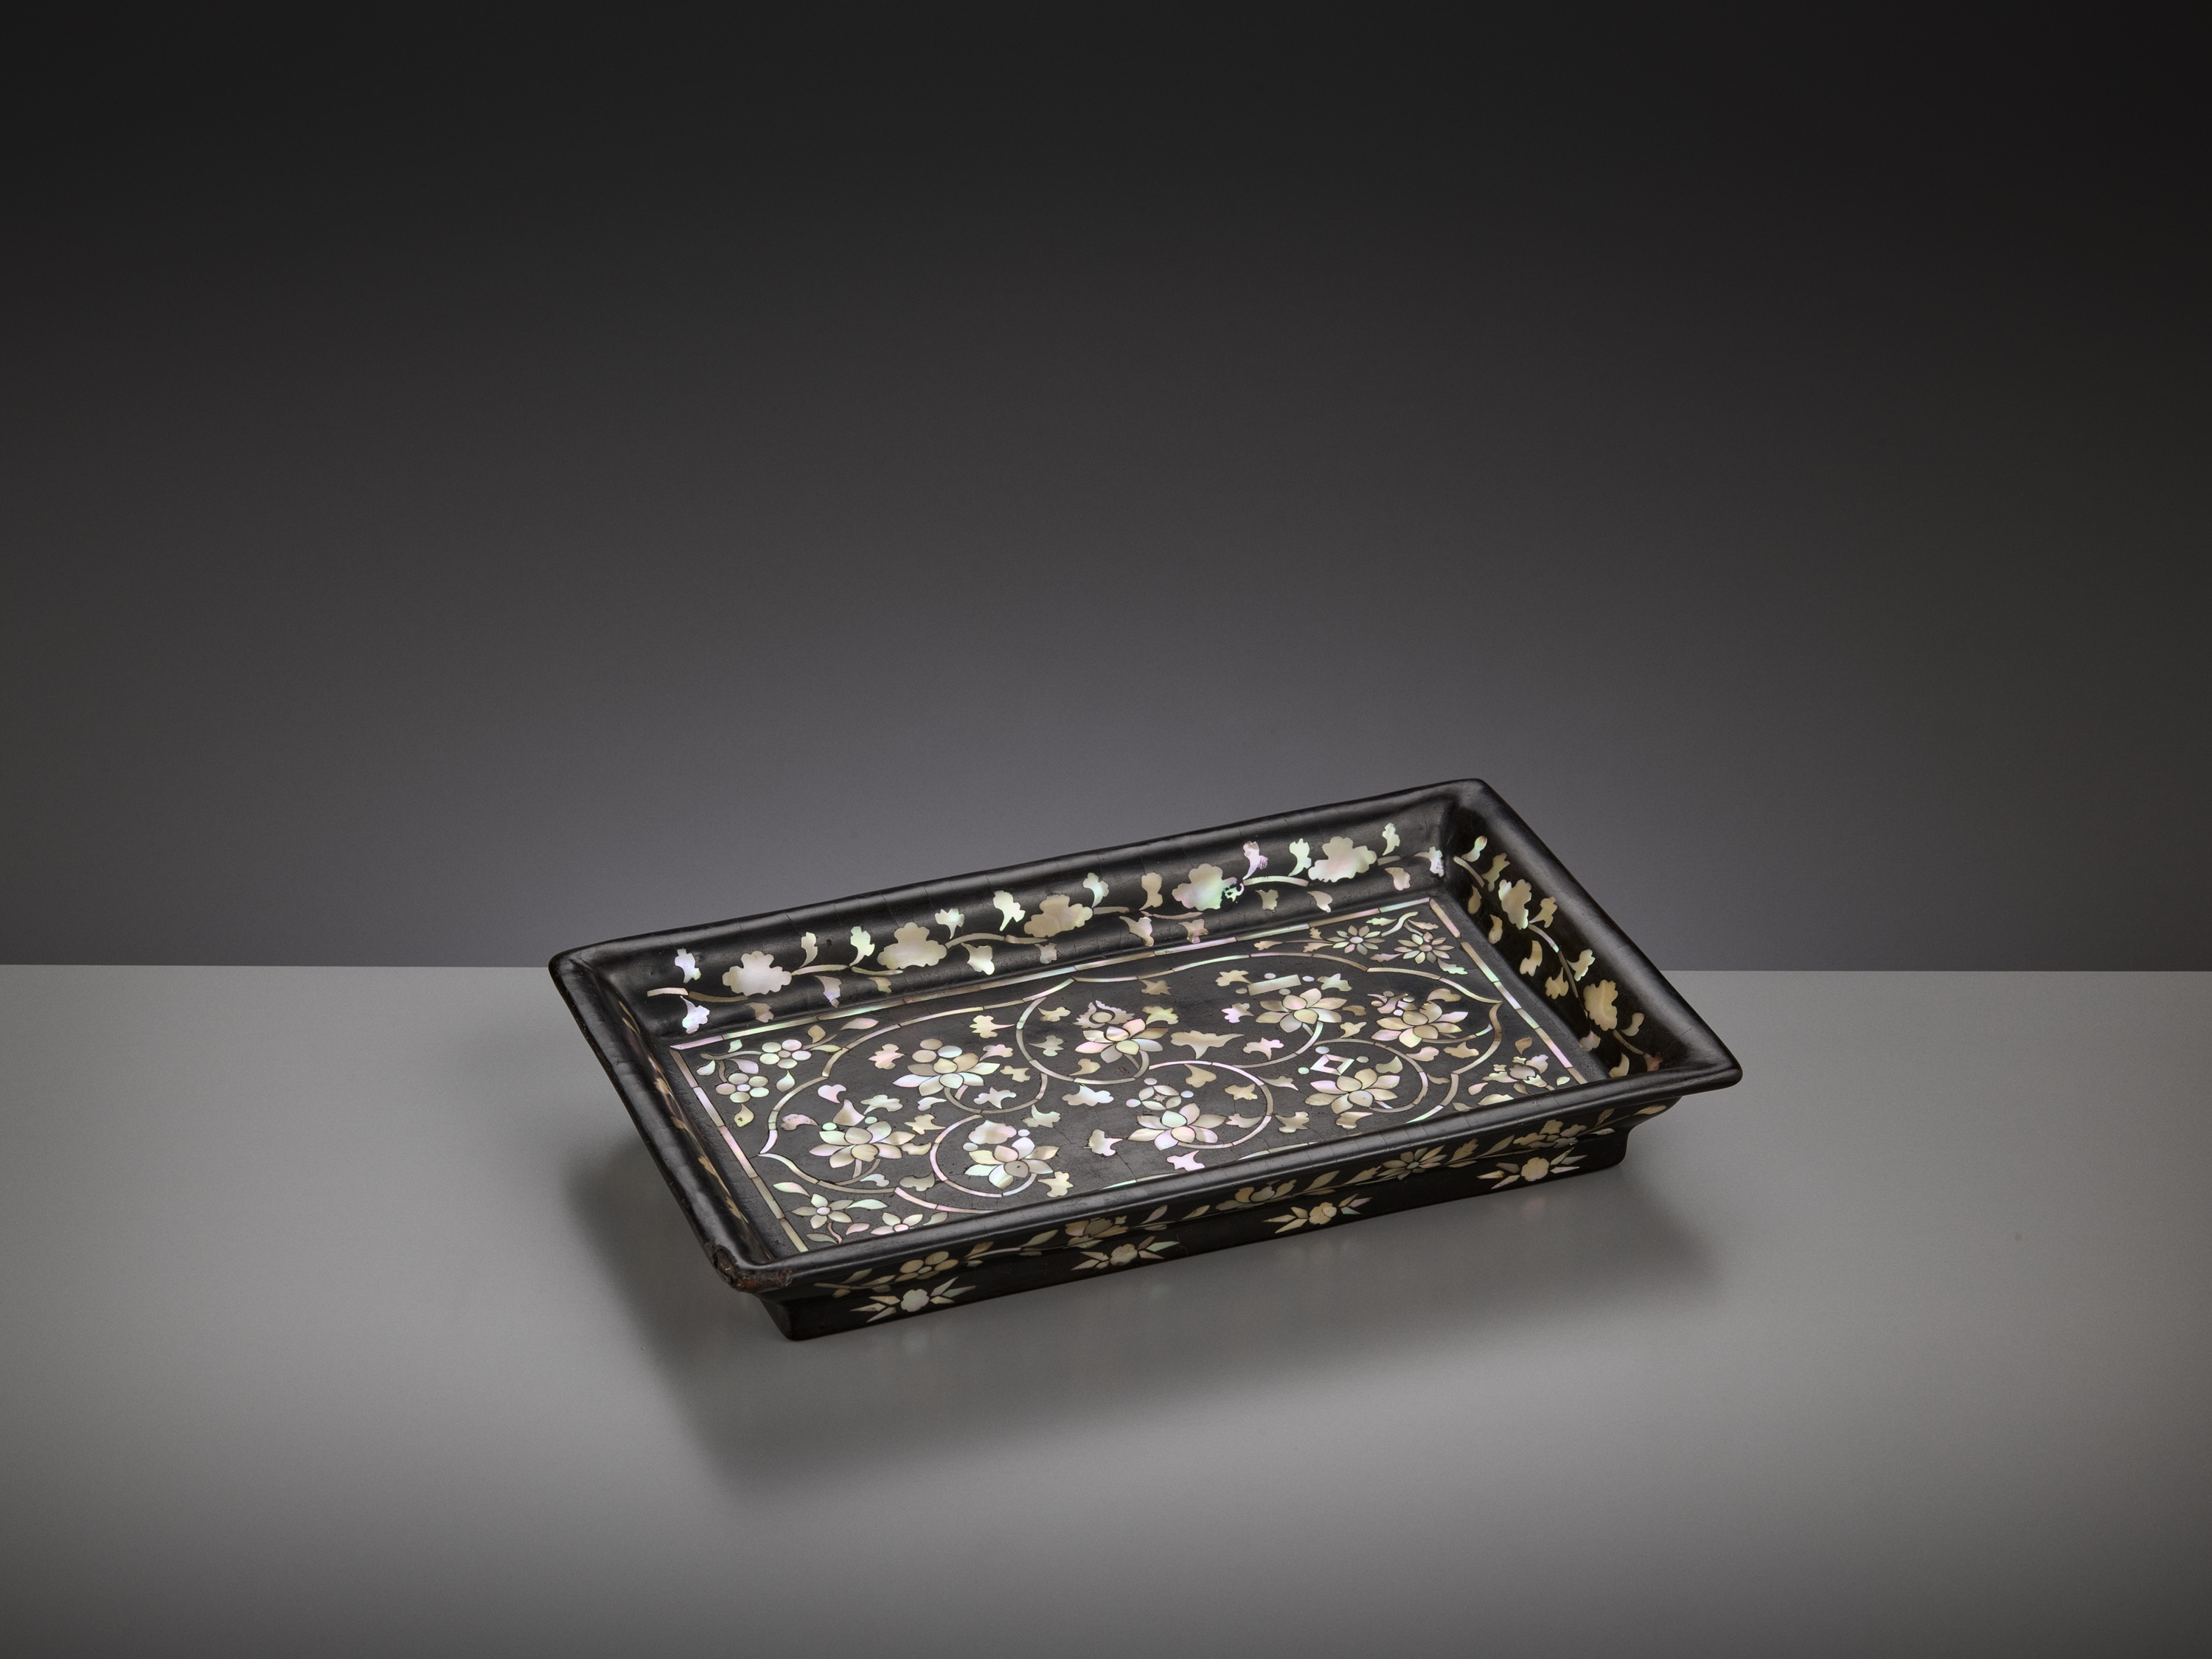 Lot 291 - A MOTHER-OF-PEARL-INLAID BLACK LACQUER